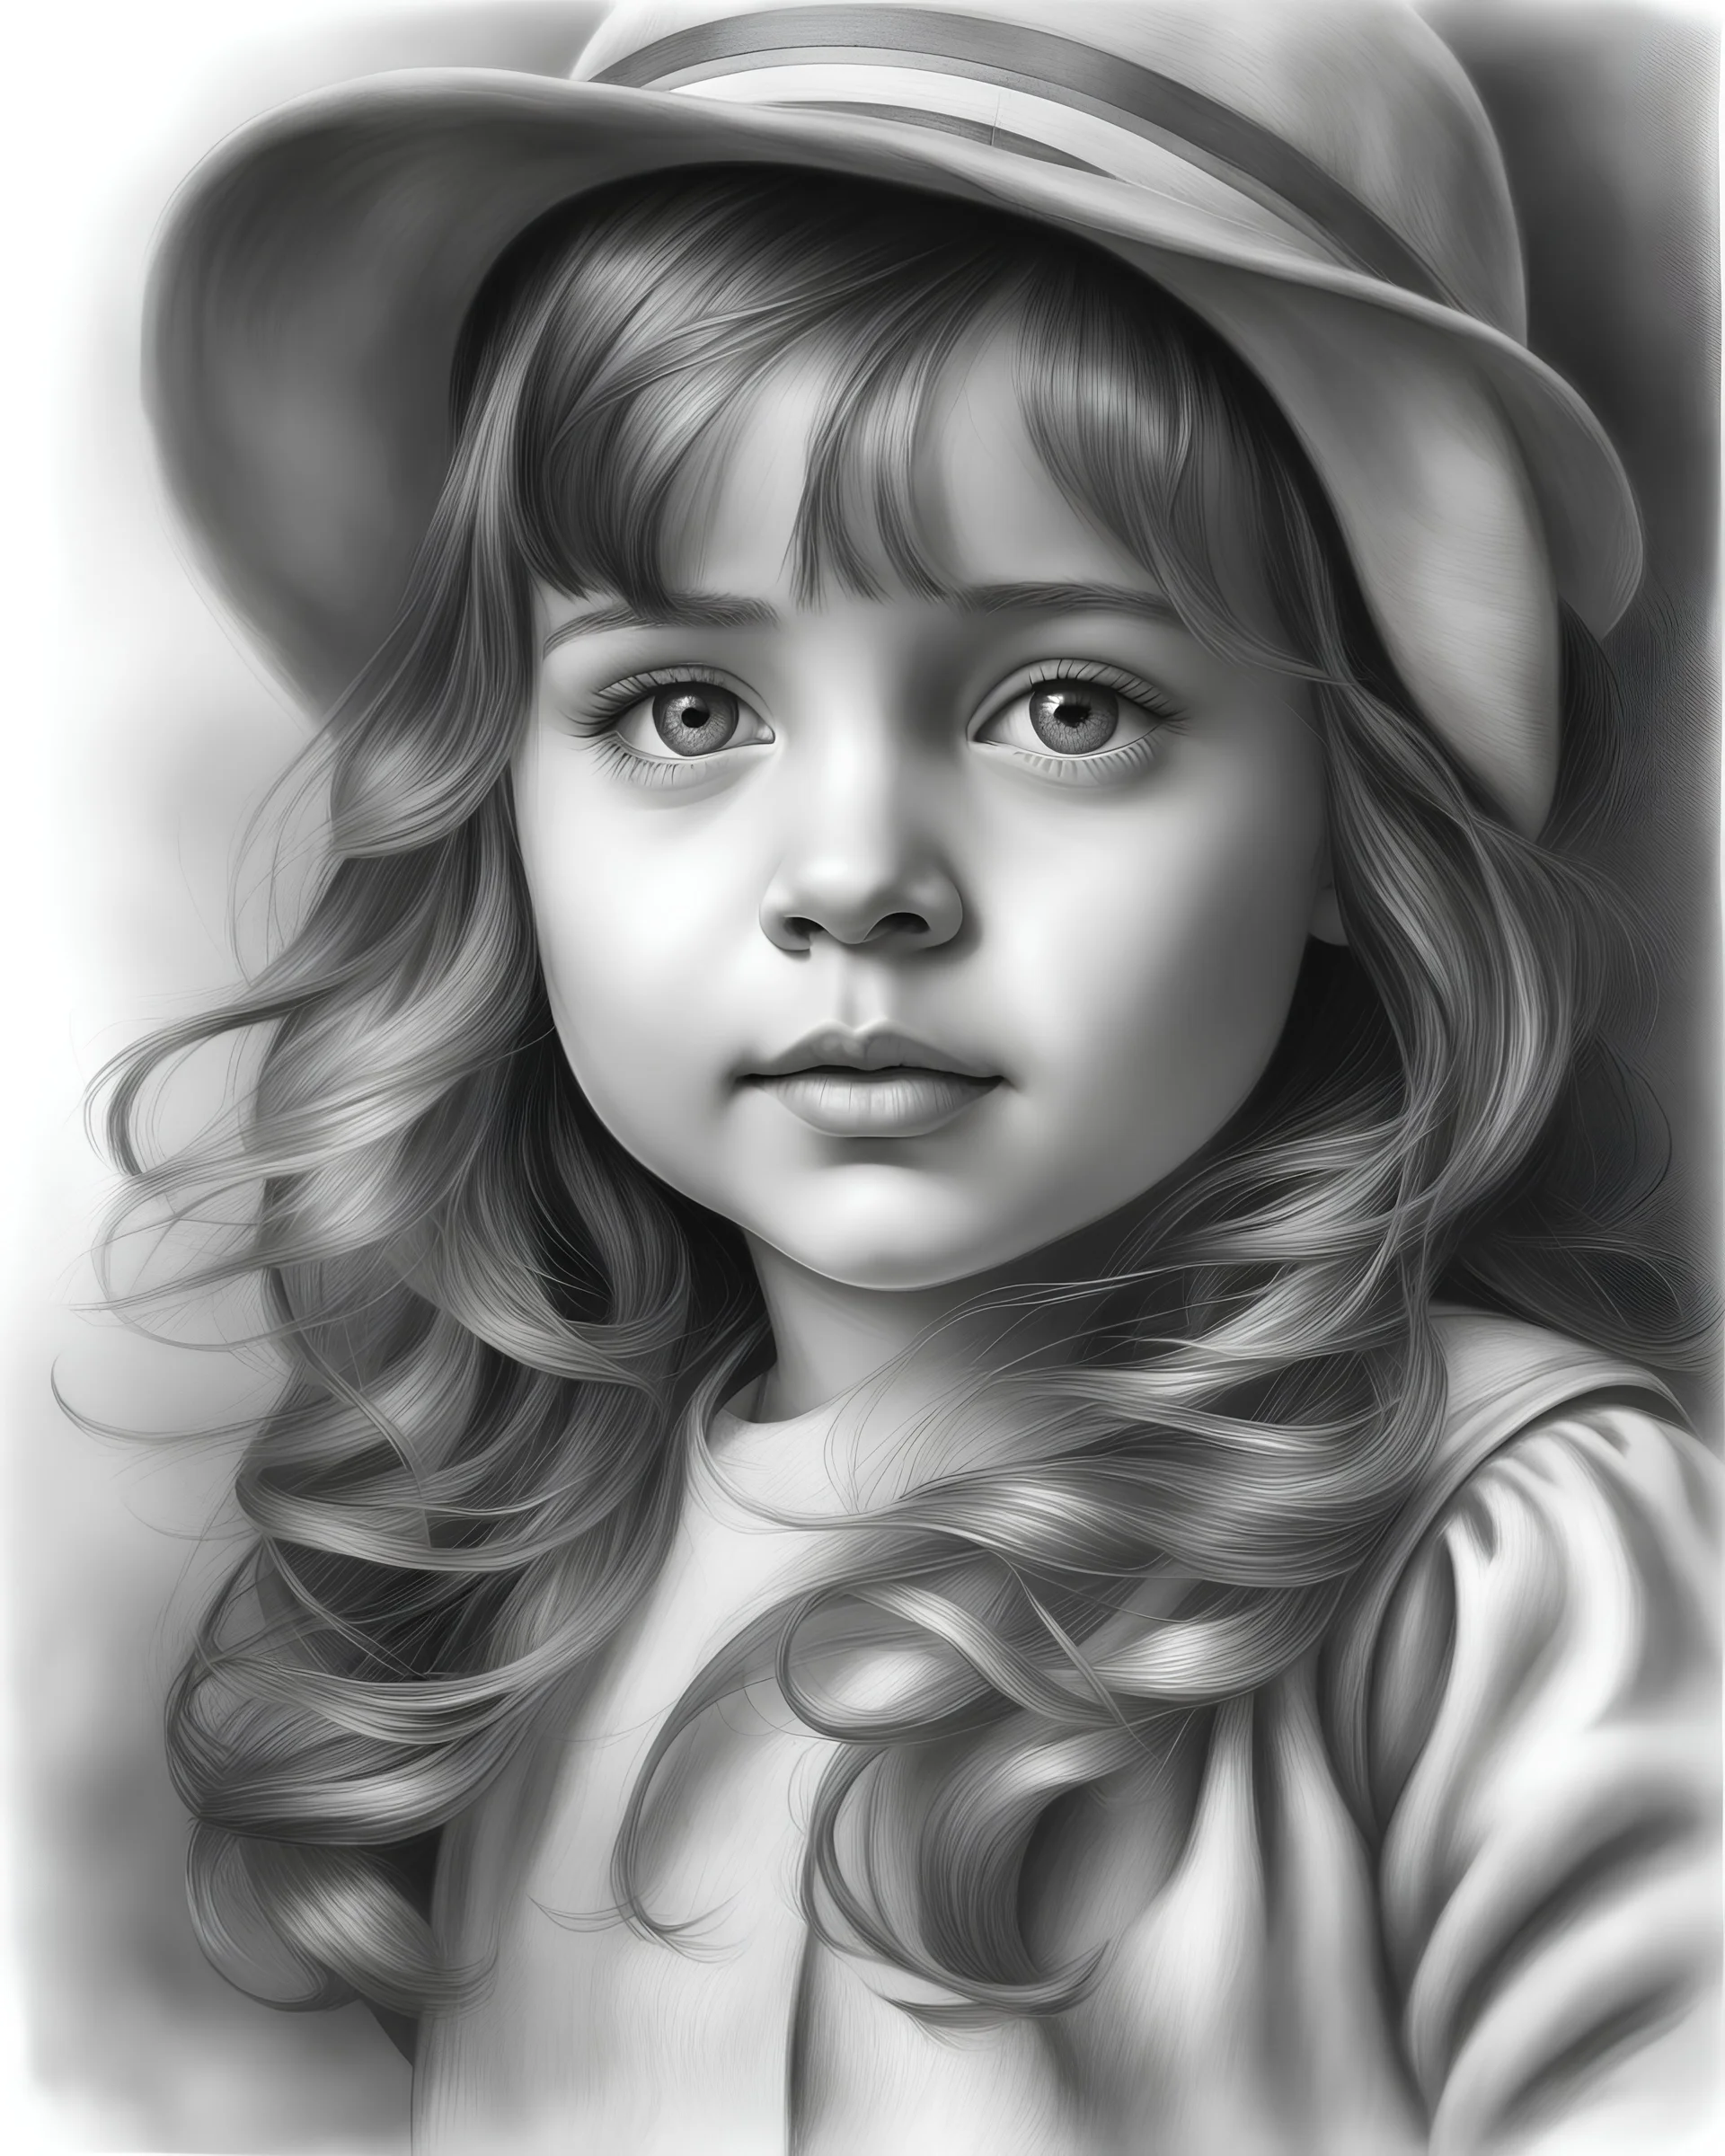 Pencil portrait drawing from photos online made by the best drawing artists